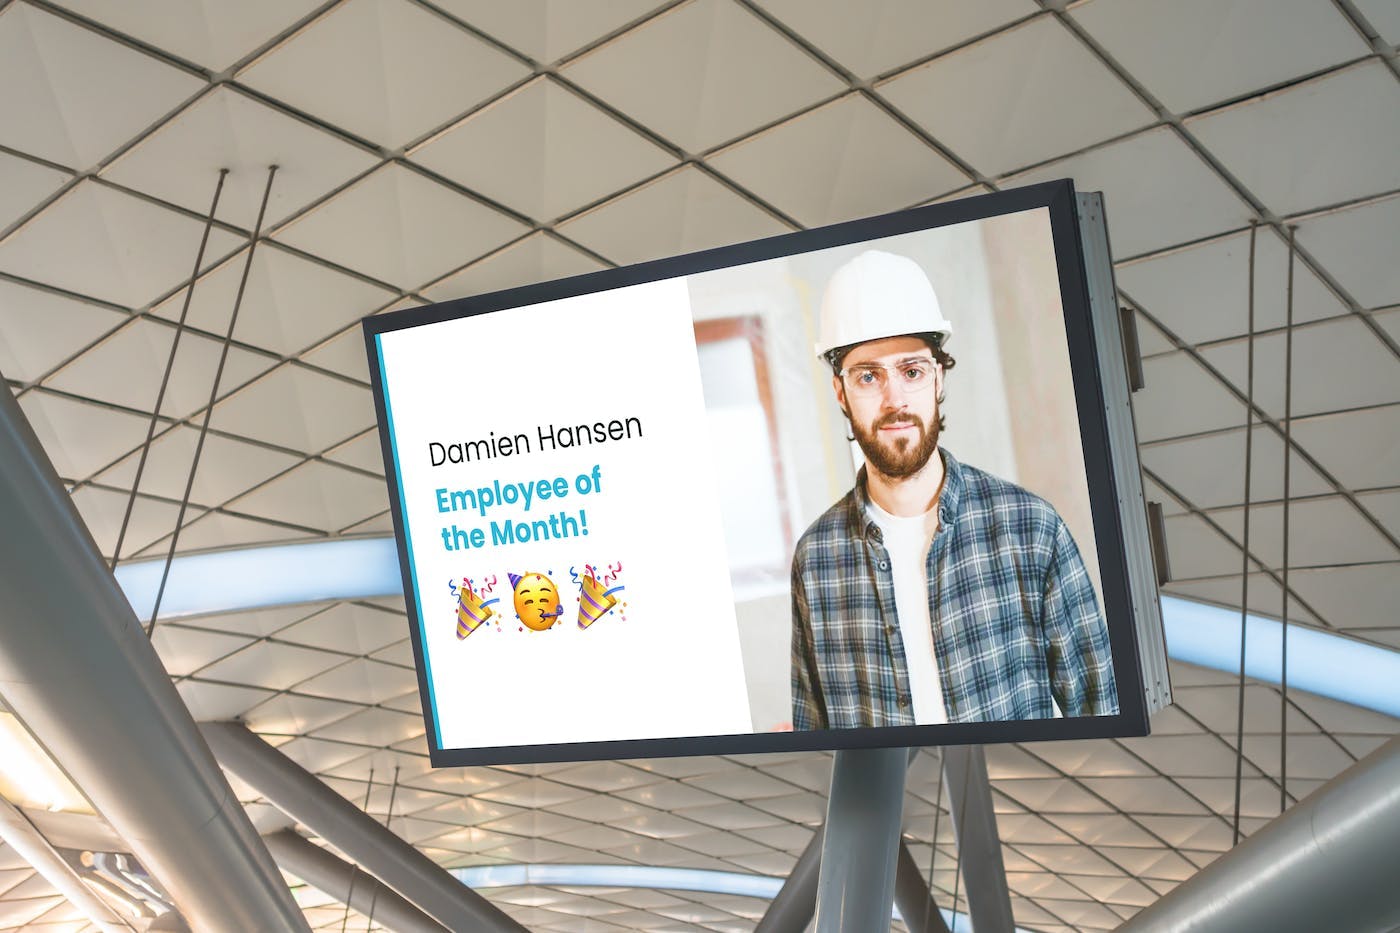 ScreenCloud Article - 4 Workplace Digital Signage Tips to Improve Employee Engagement